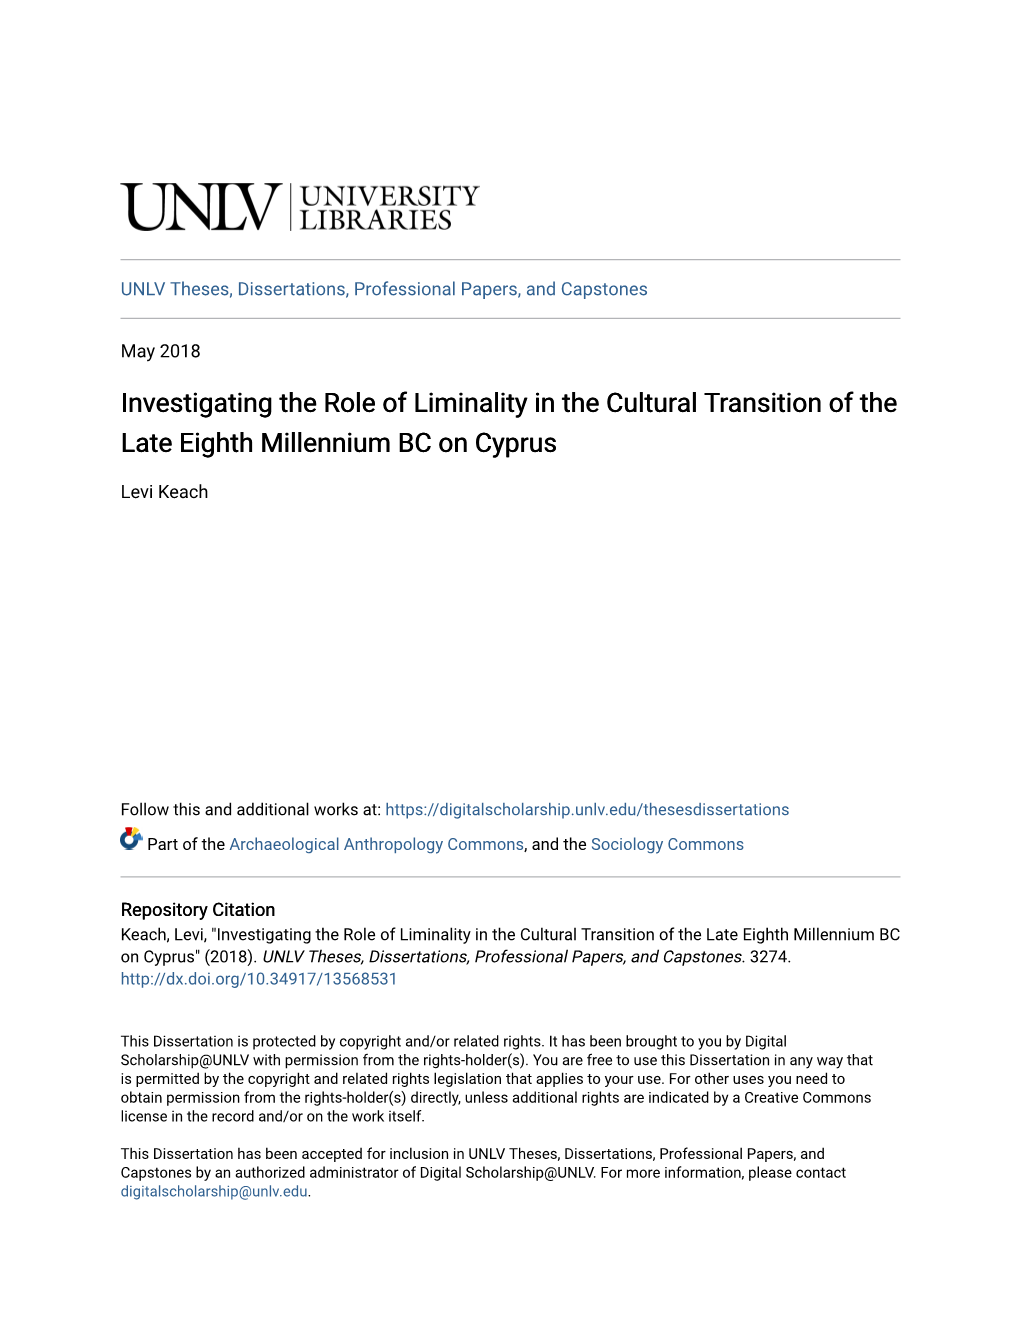 Investigating the Role of Liminality in the Cultural Transition of the Late Eighth Millennium BC on Cyprus